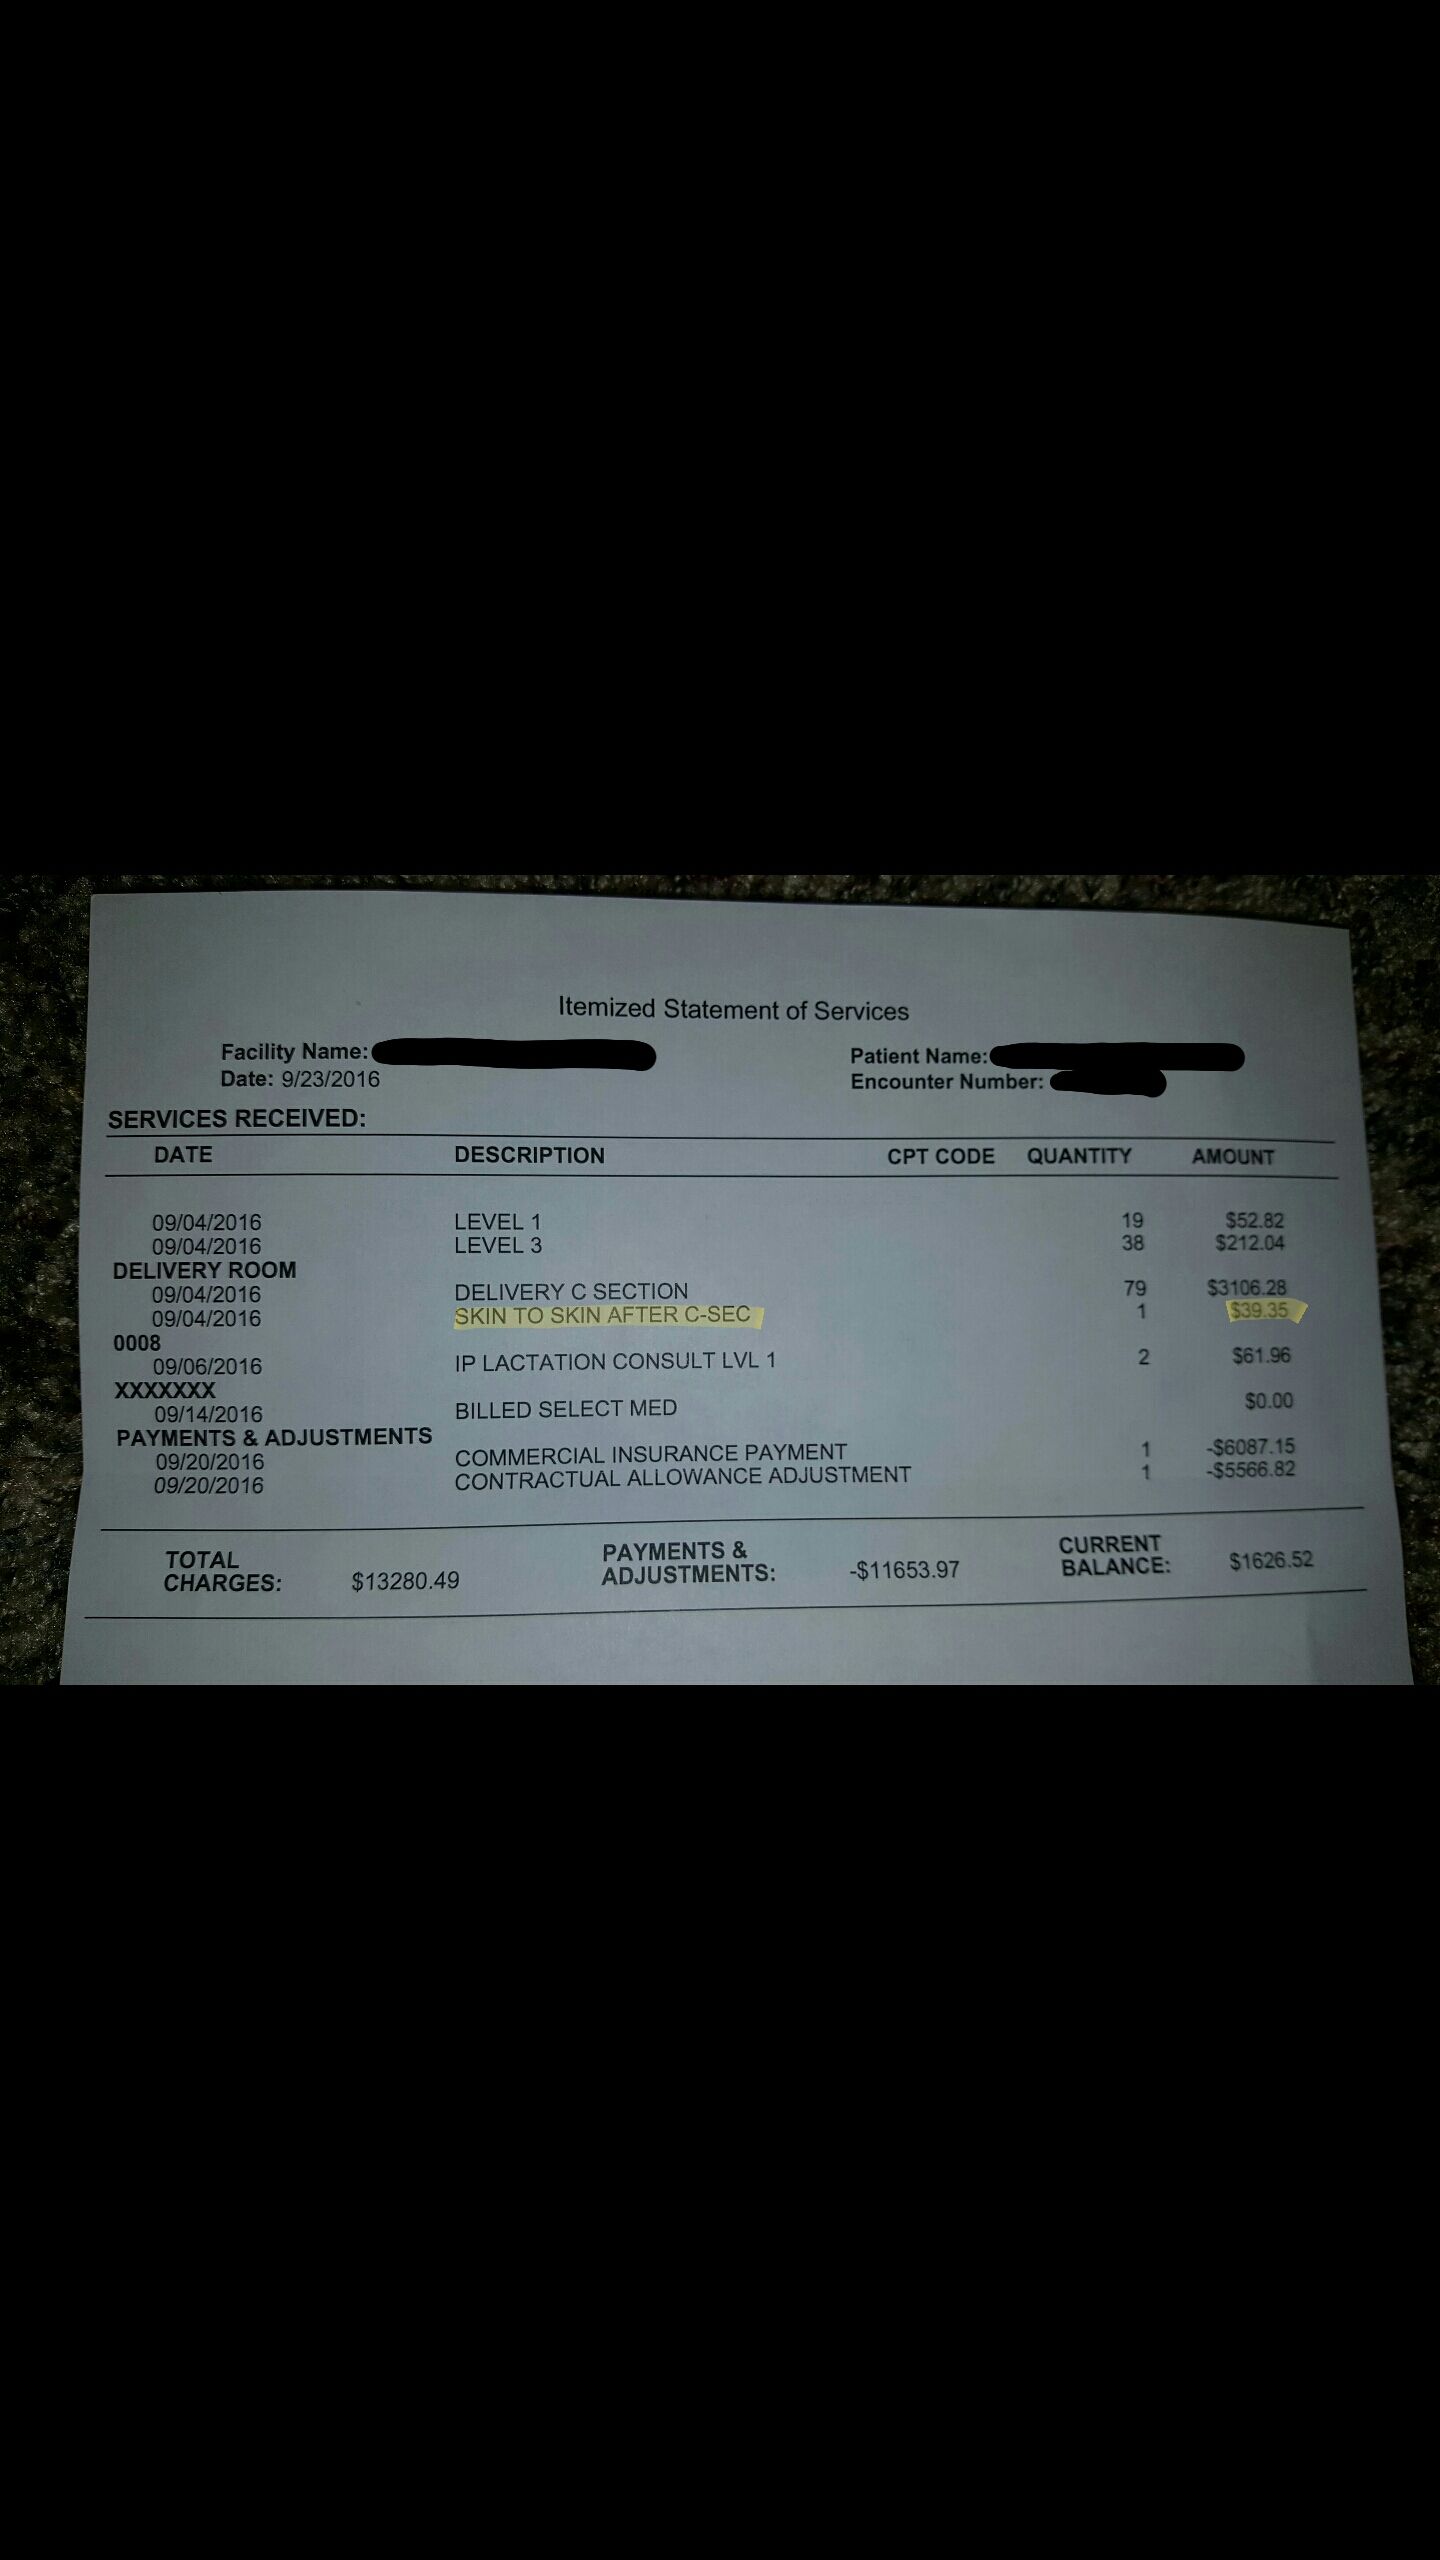 I had to pay $39.35 to hold my baby after he was born.